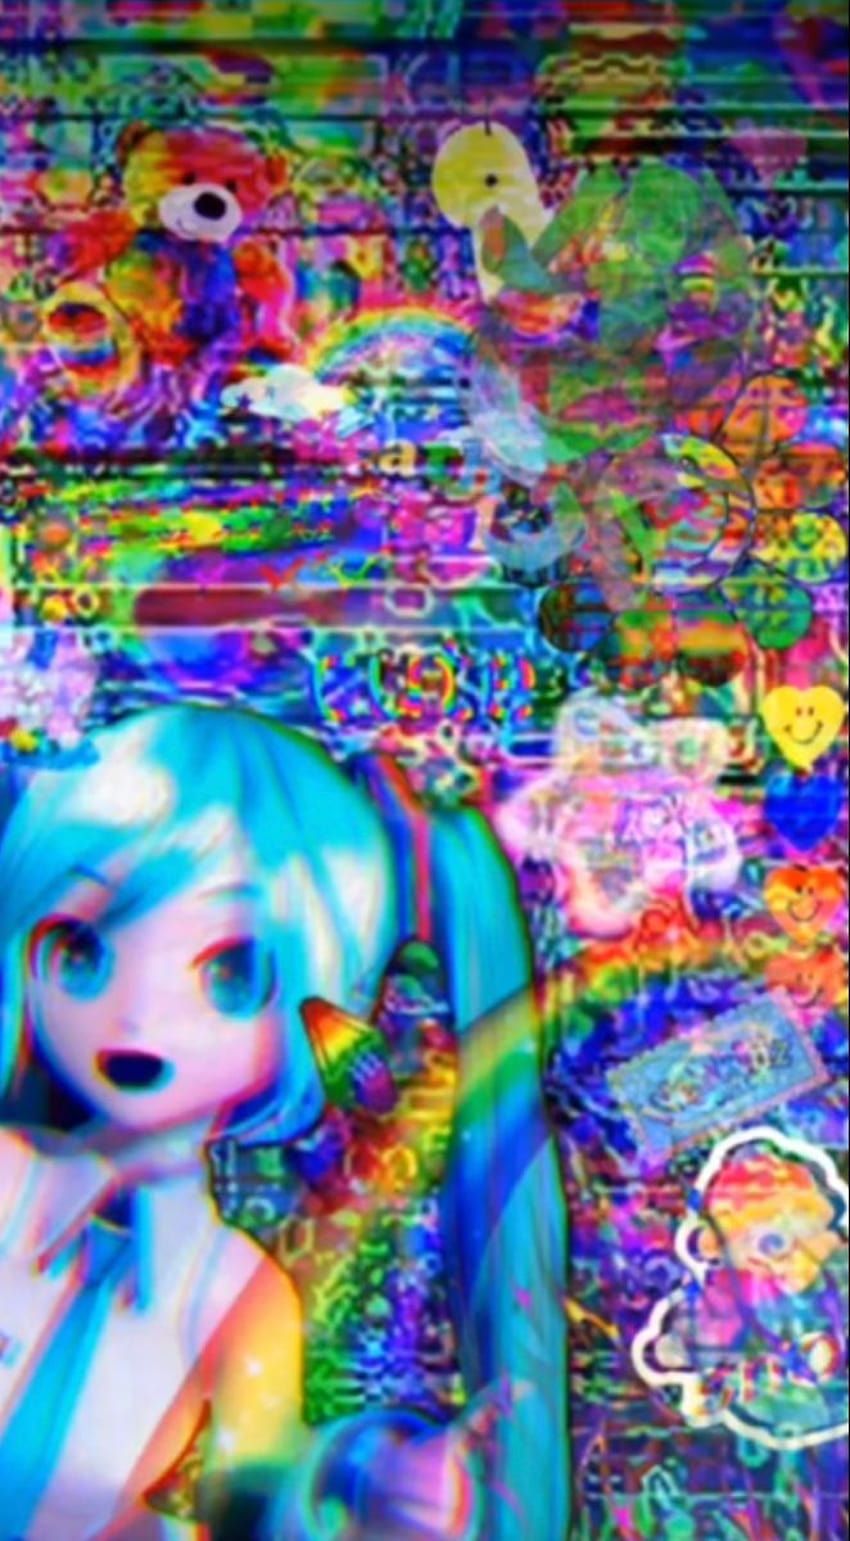 A blue anime girl with black lips and blue hair is surrounded by a rainbow background. - Glitchcore, weirdcore